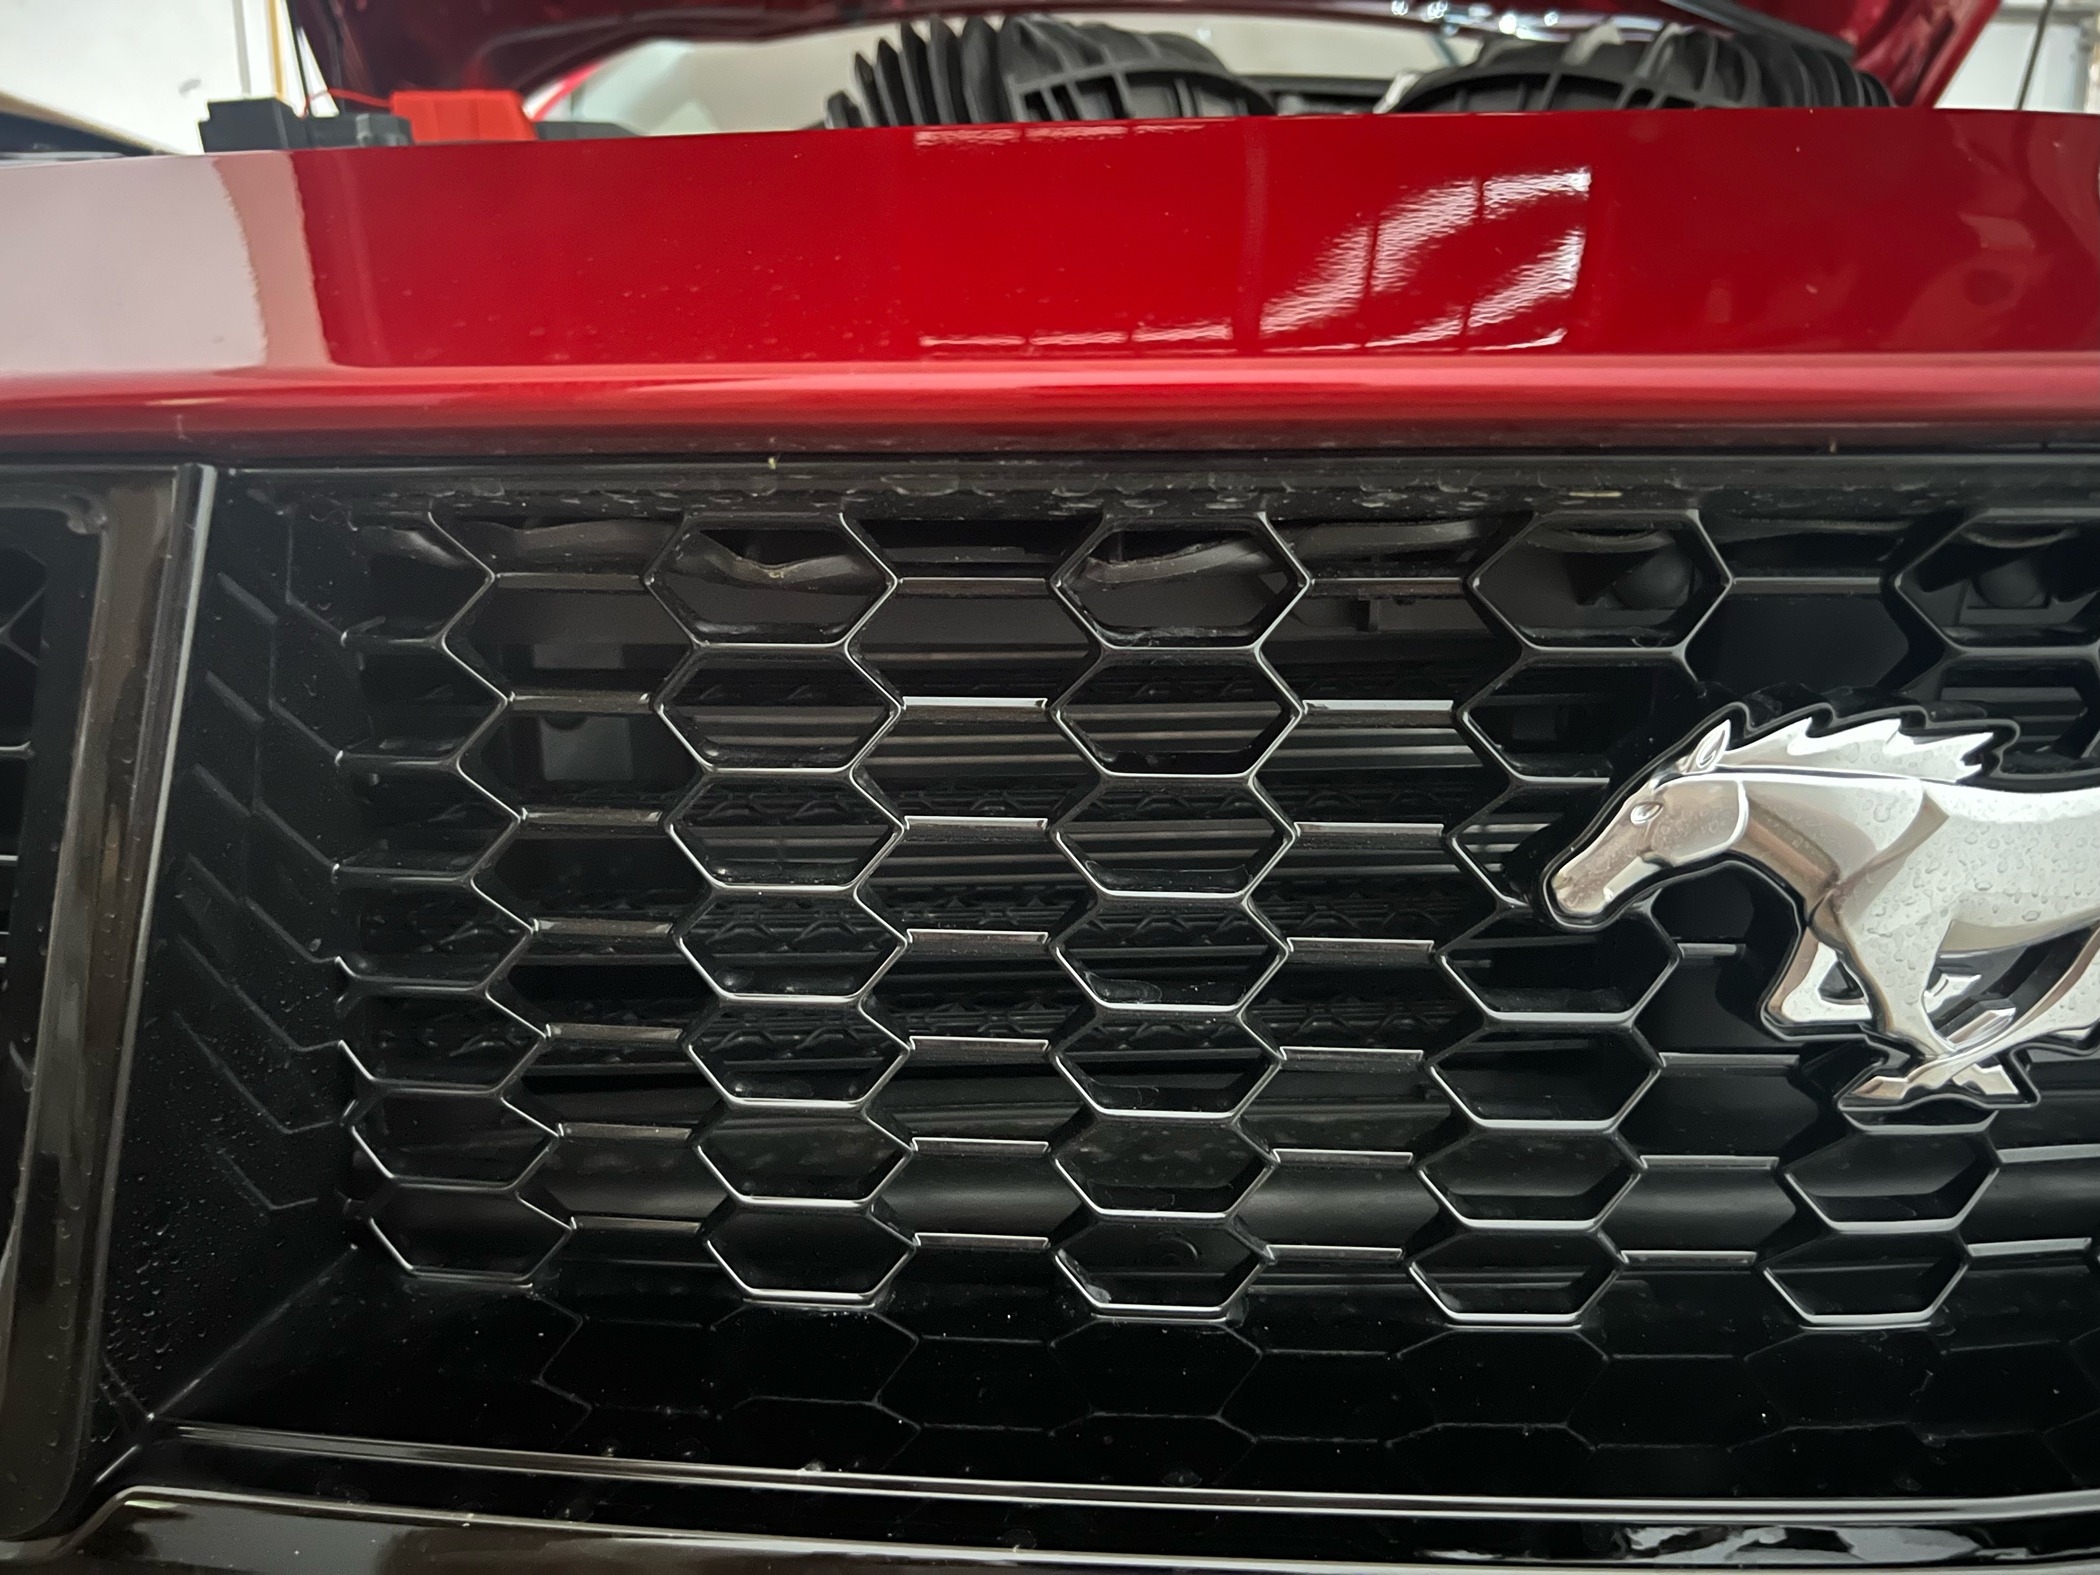 S650 Mustang Rubber piece hanging down behind grille image2